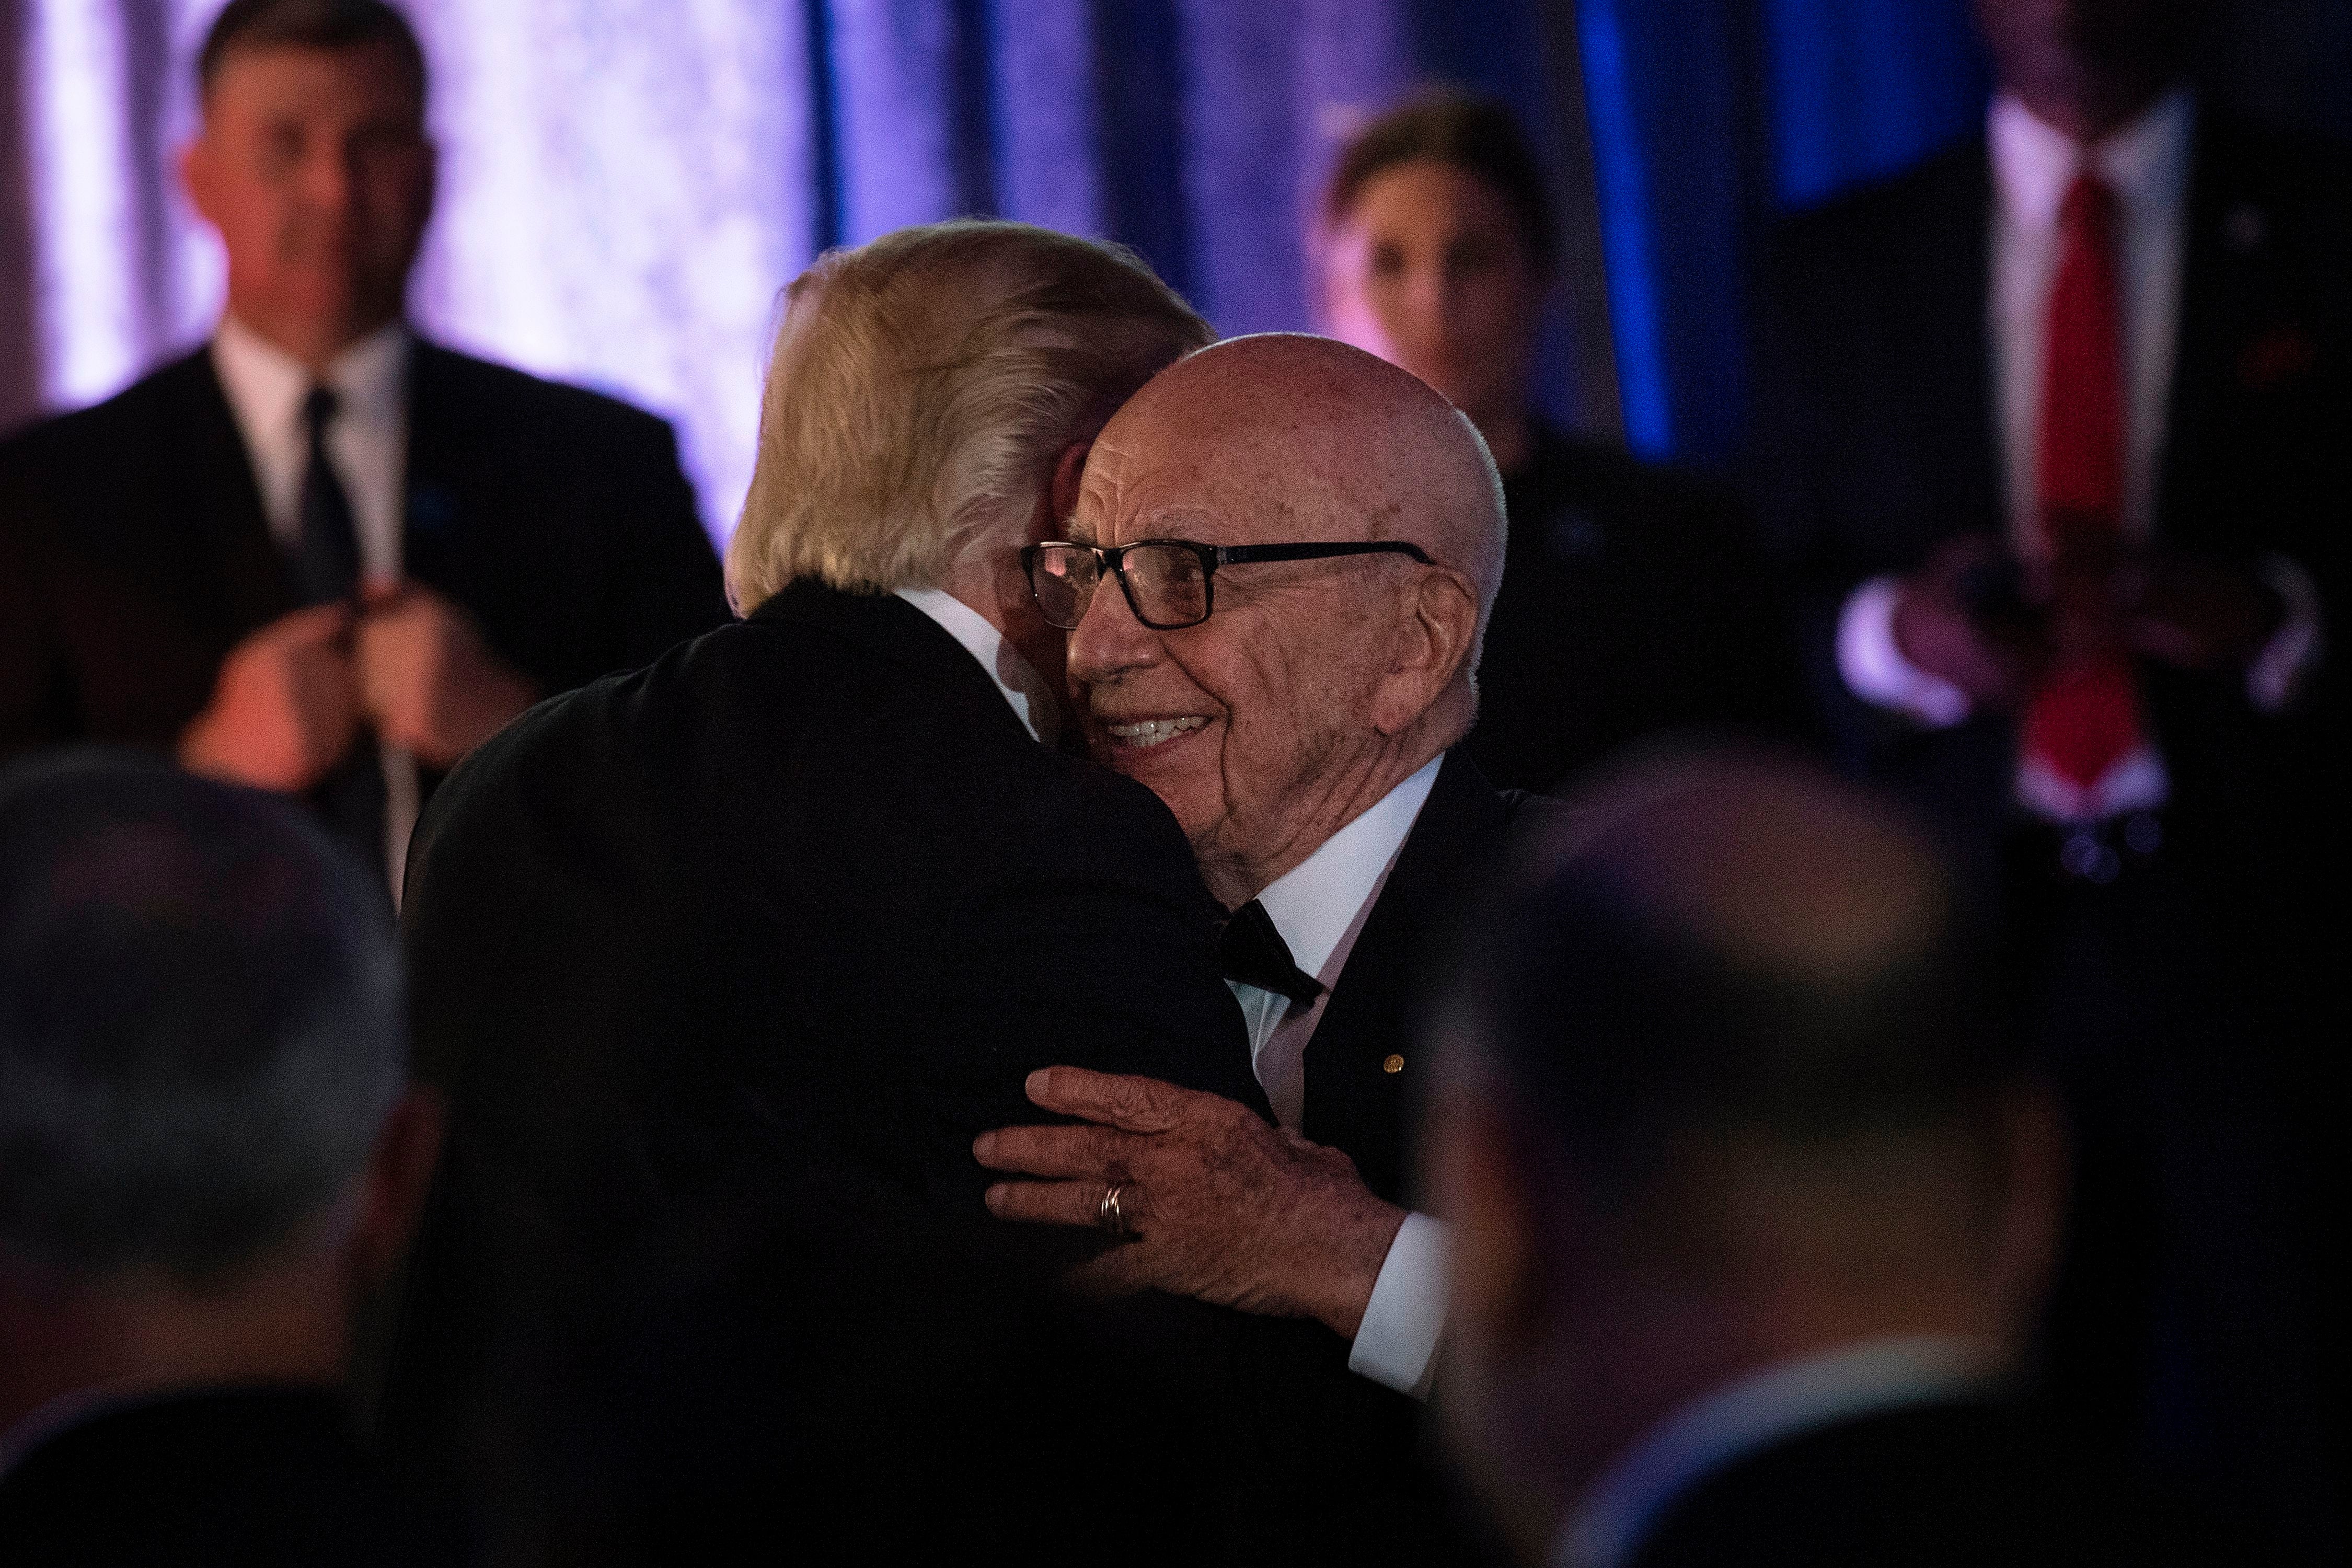 US President Donald Trump (L) is embraced by Rupert Murdoch, Executive Chairman of News Corp, during a dinner to commemorate the 75th anniversary of the Battle of the Coral Sea during WWII onboard the Intrepid Sea, Air and Space Museum May 4, 2017 in New York